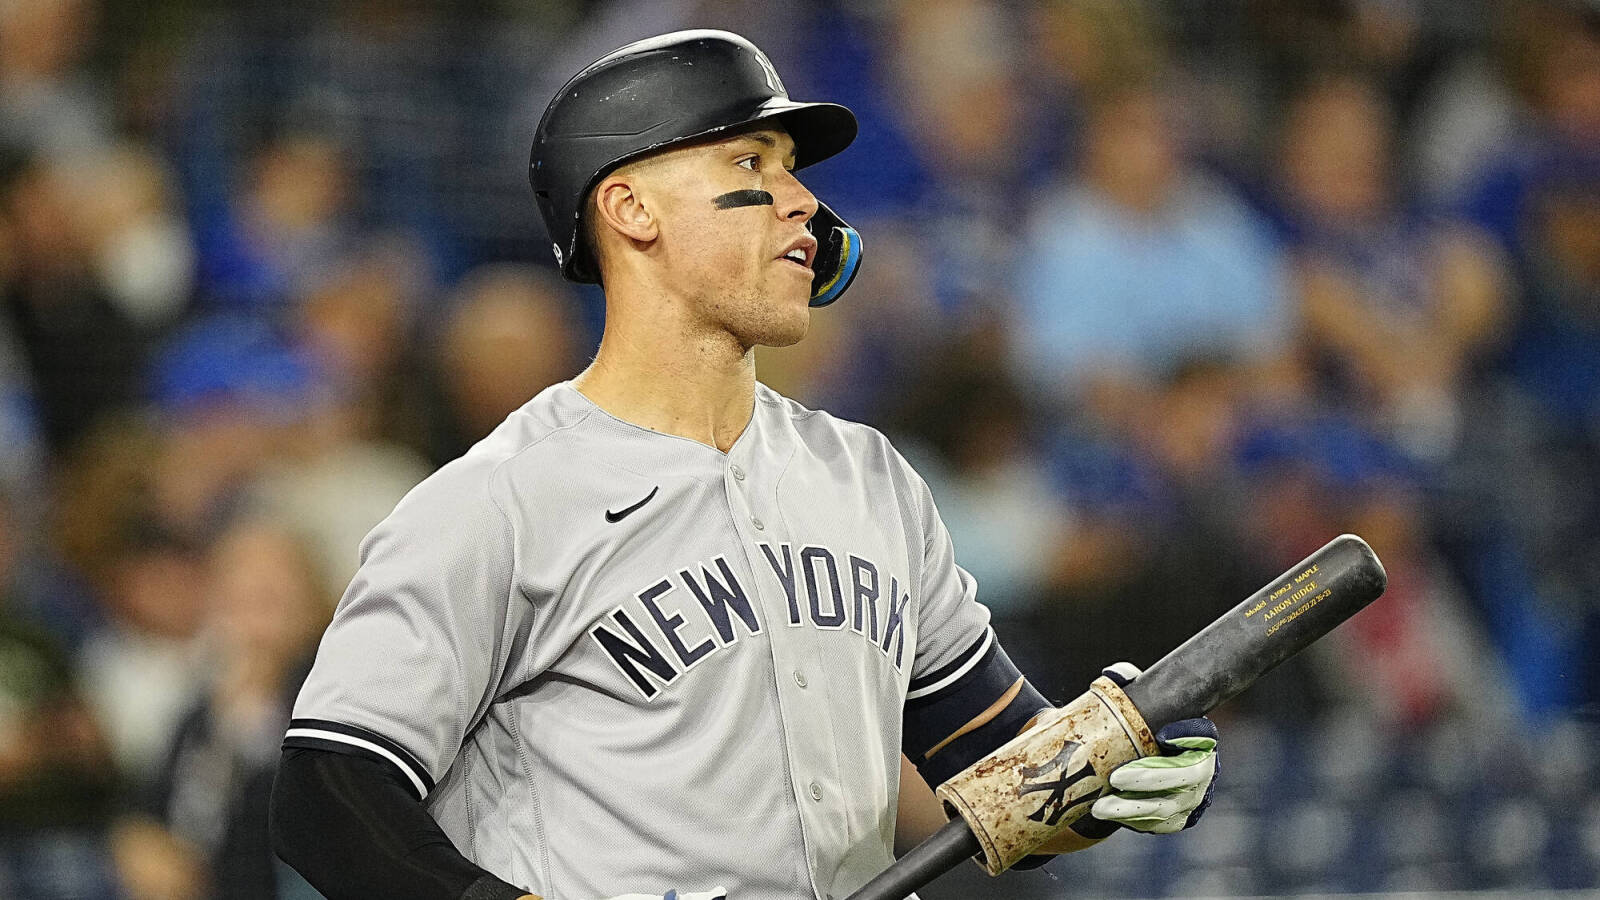 College football fans are already mad about potential Aaron Judge ...